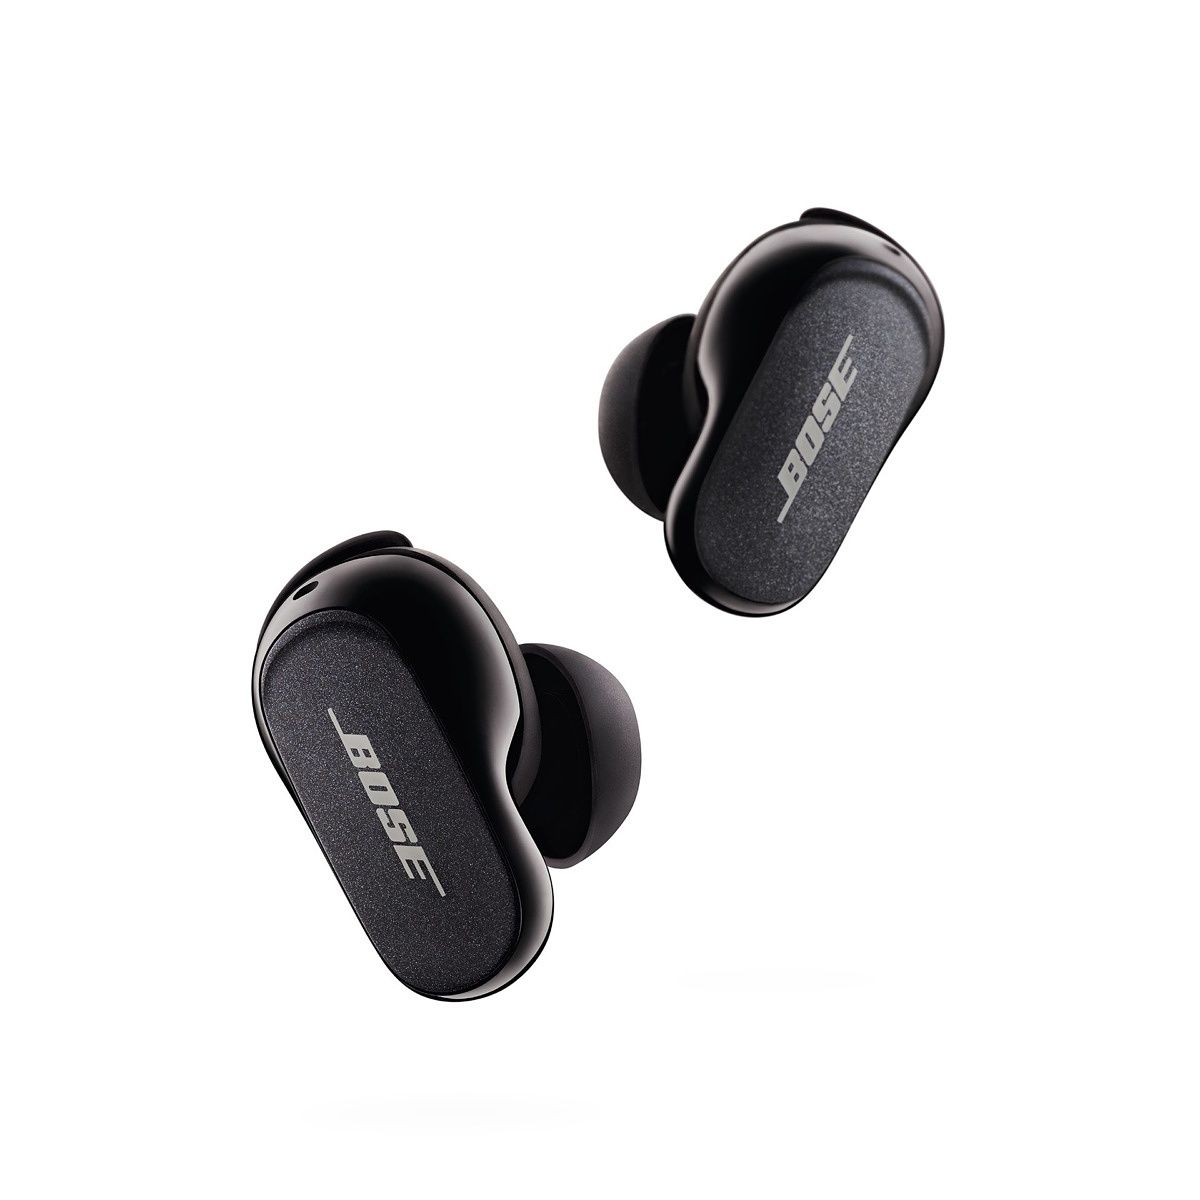 Bose QuietComfort Earbuds II will be available on September 15th 